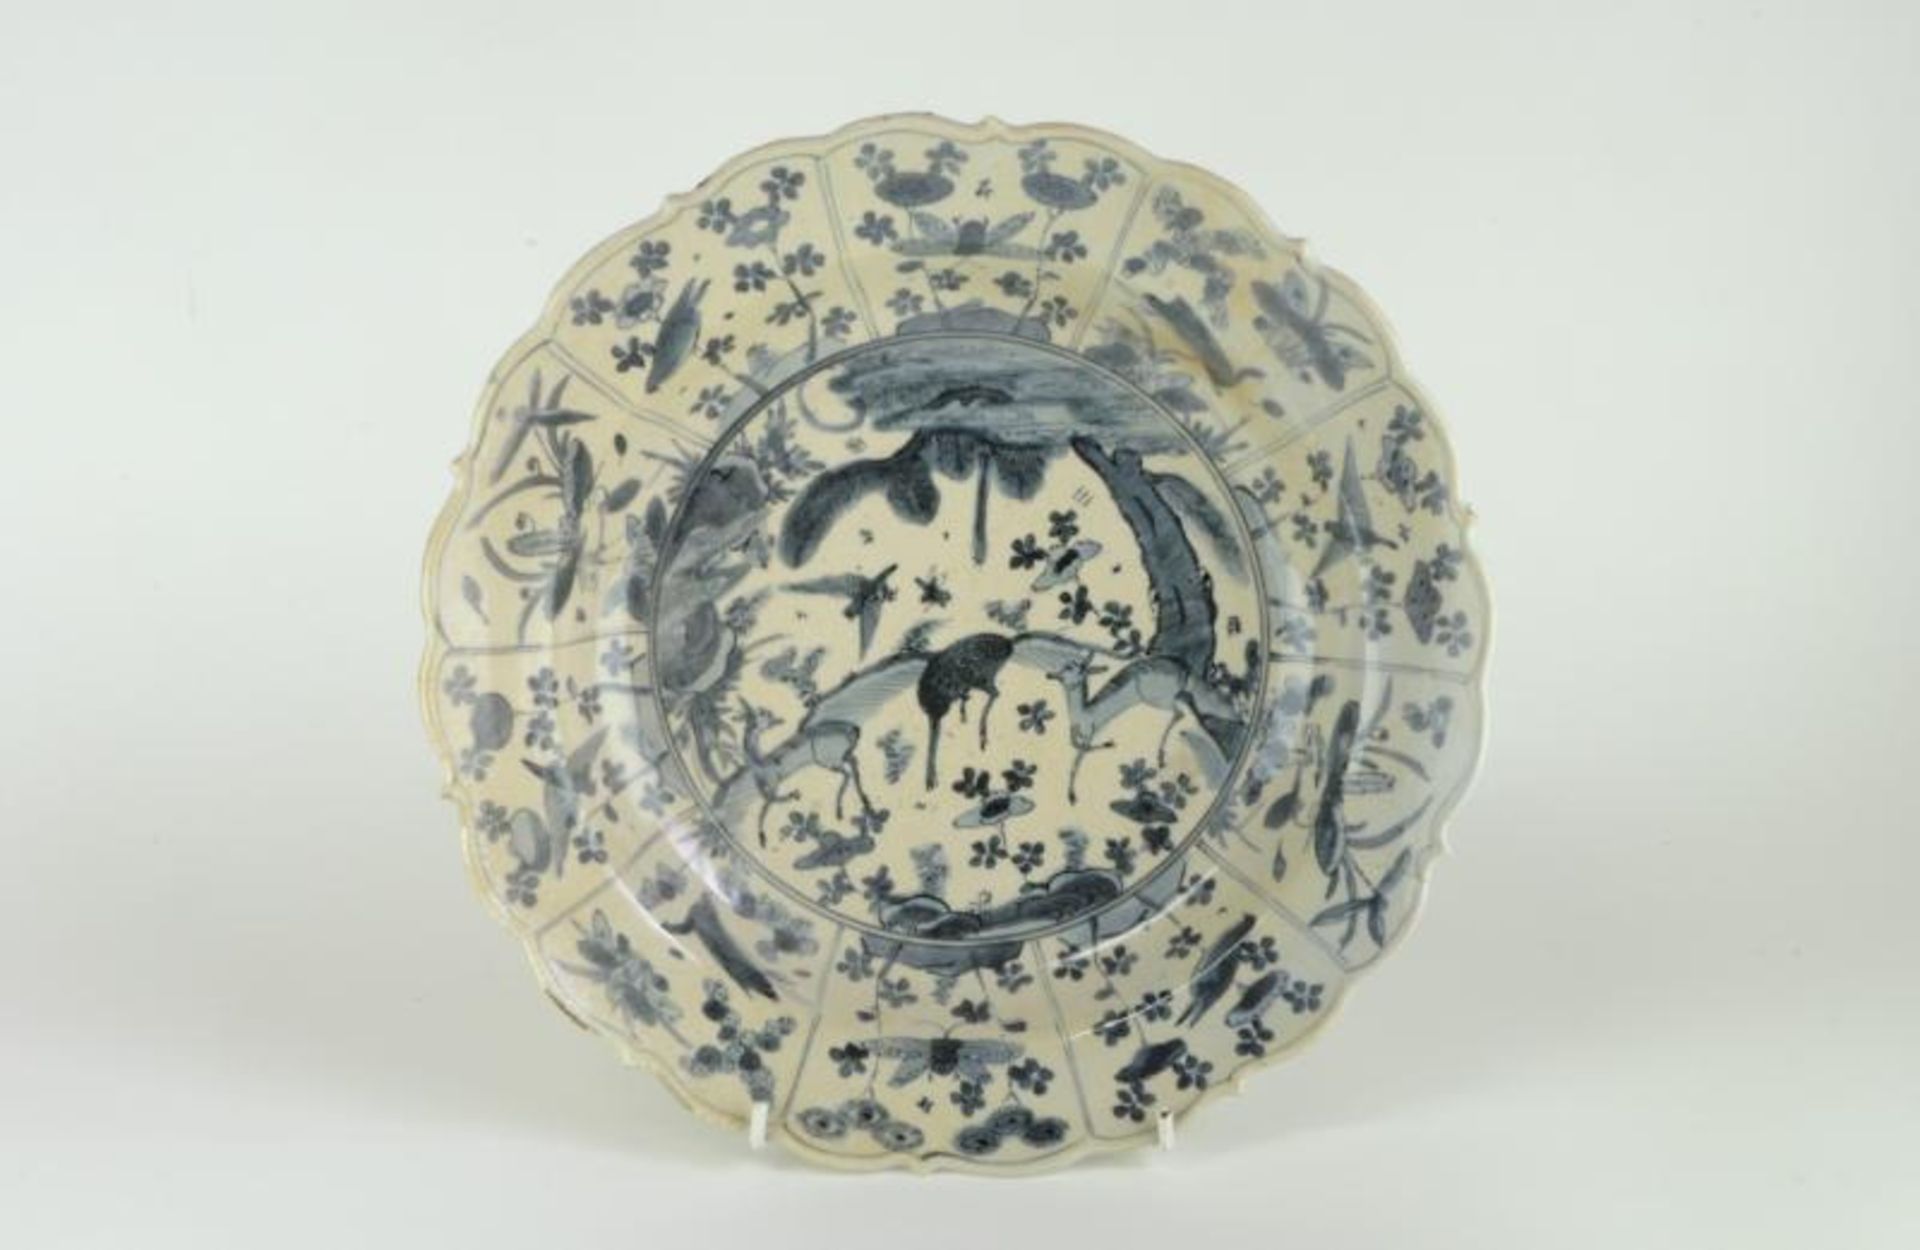 An Oriental Kraak style plate, probably provincial Chinese, painted in the centre with deer, the